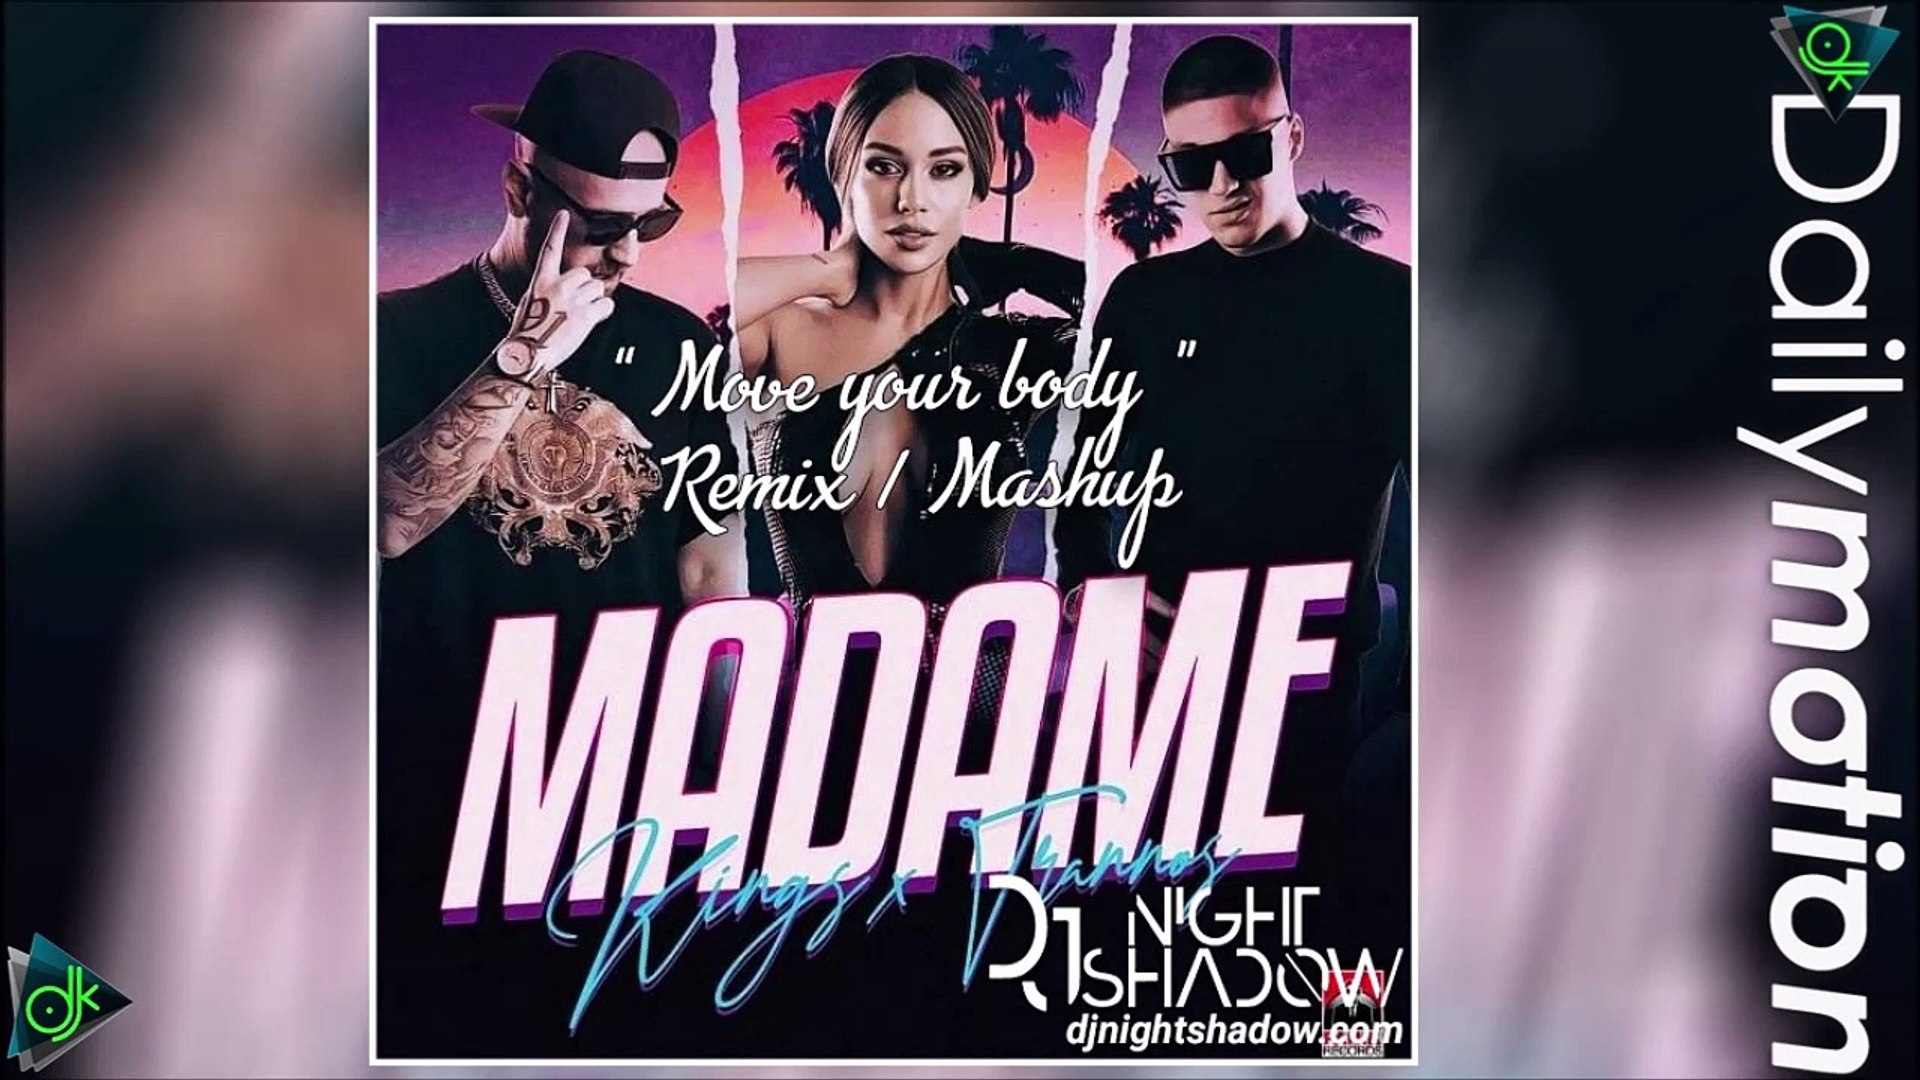 Kings x Trannos - Madame (Nightshadow's Move Your Body Remix - Mashup) -  video Dailymotion